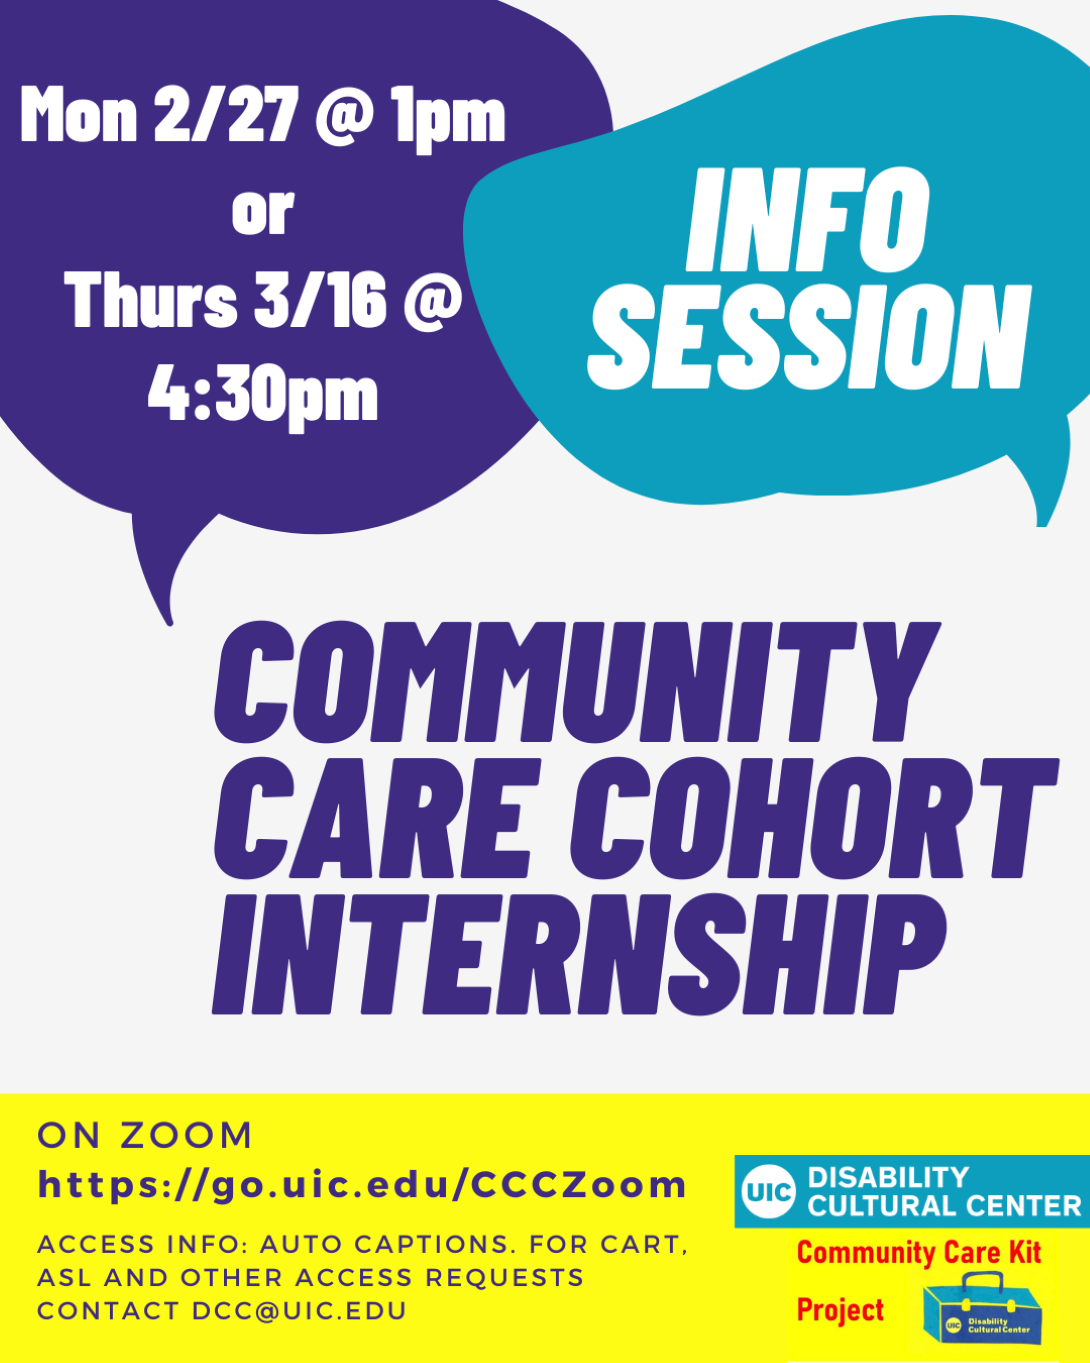 The event title and date are written in blue speech bubbles at the top of the image. A yellow banner across the bottom contains Zoom link and access info. The Community Care Kit Project logo is at the bottom right.